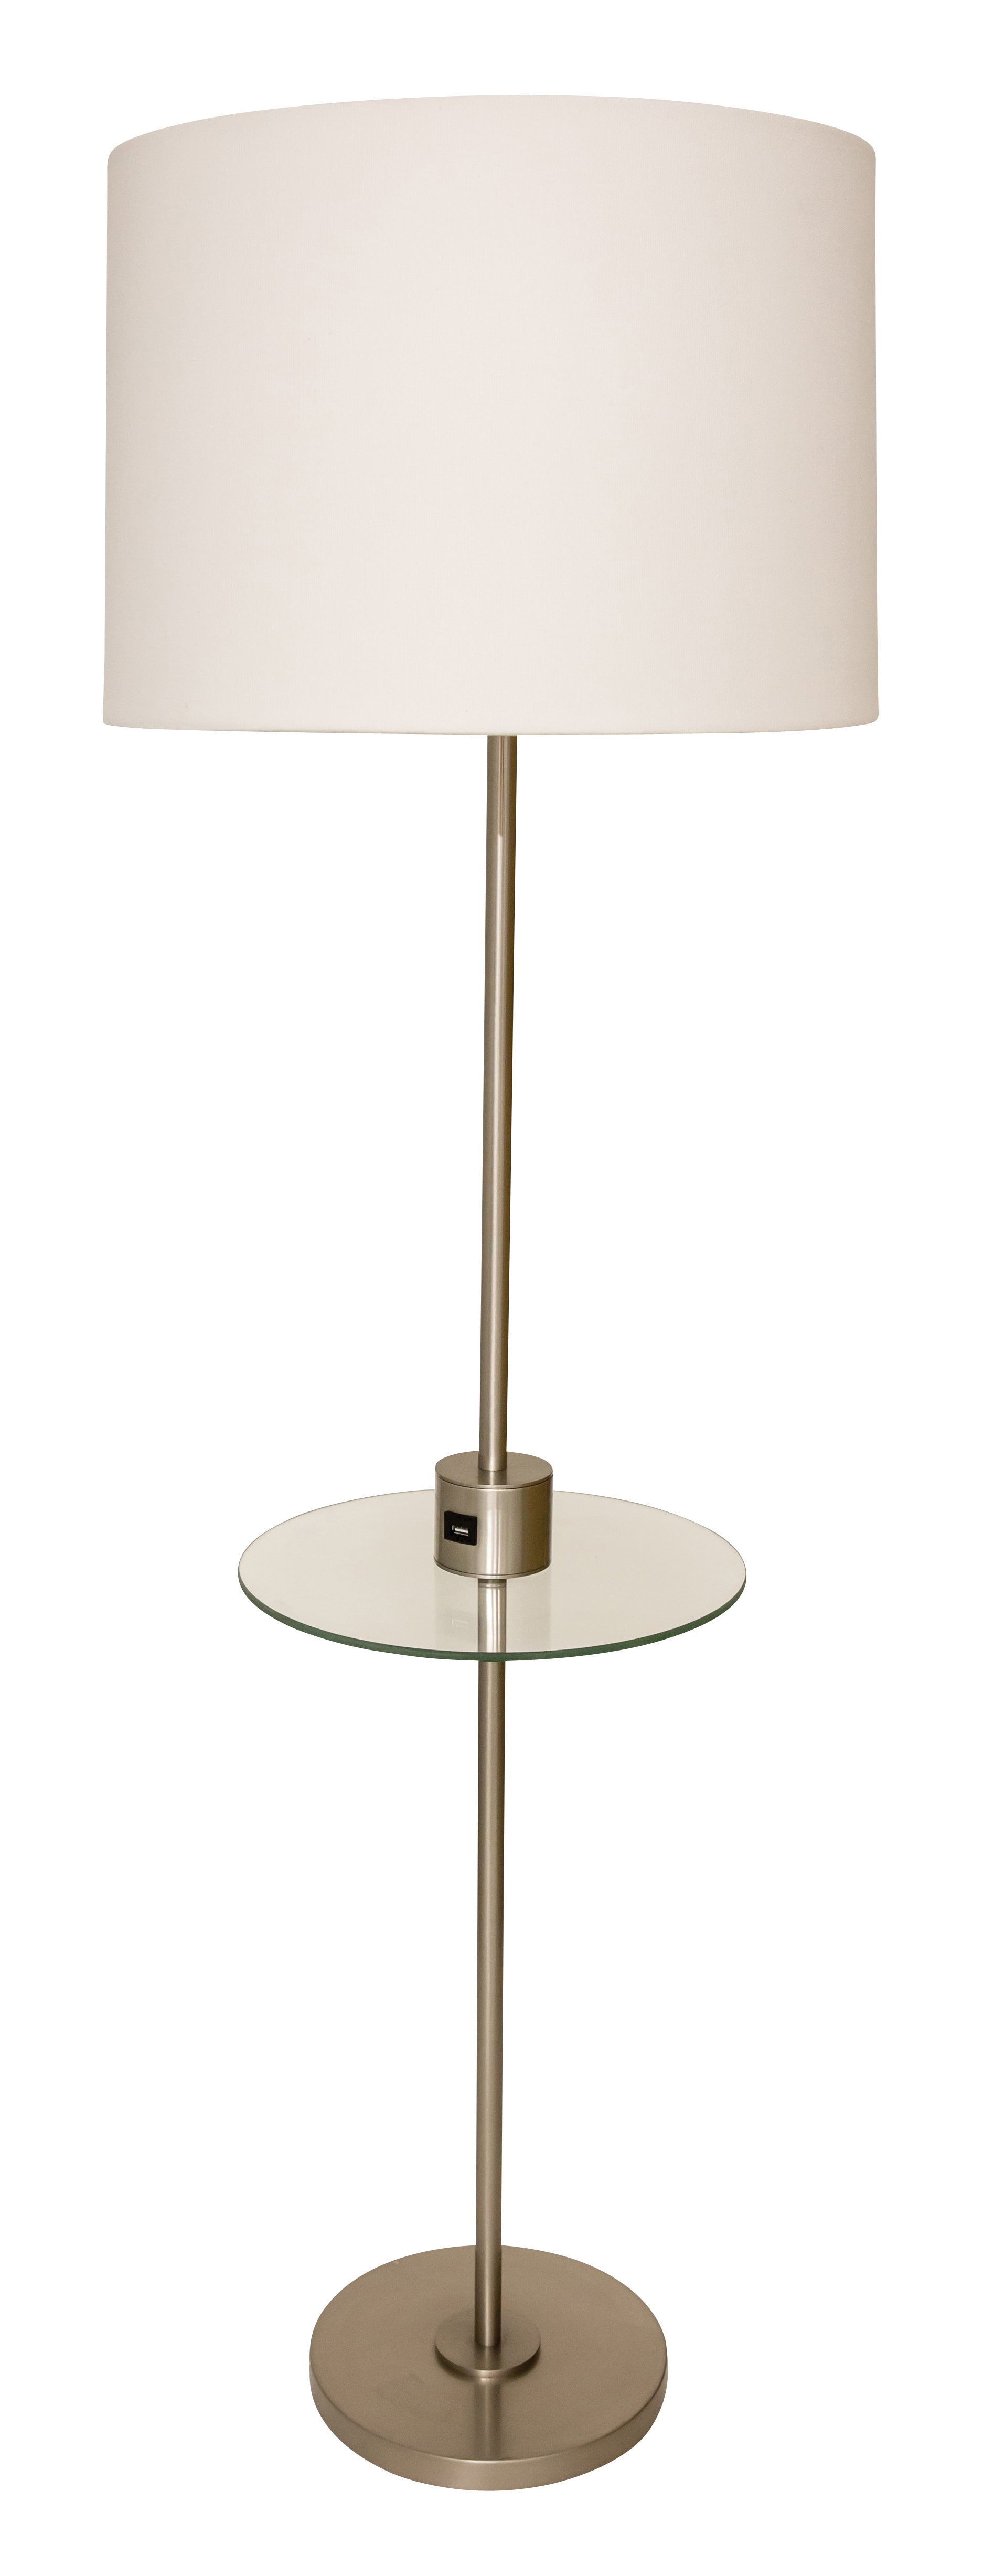 House of Troy Brandon Floor Lamp with USB Port in Satin Nickel BR102-SN